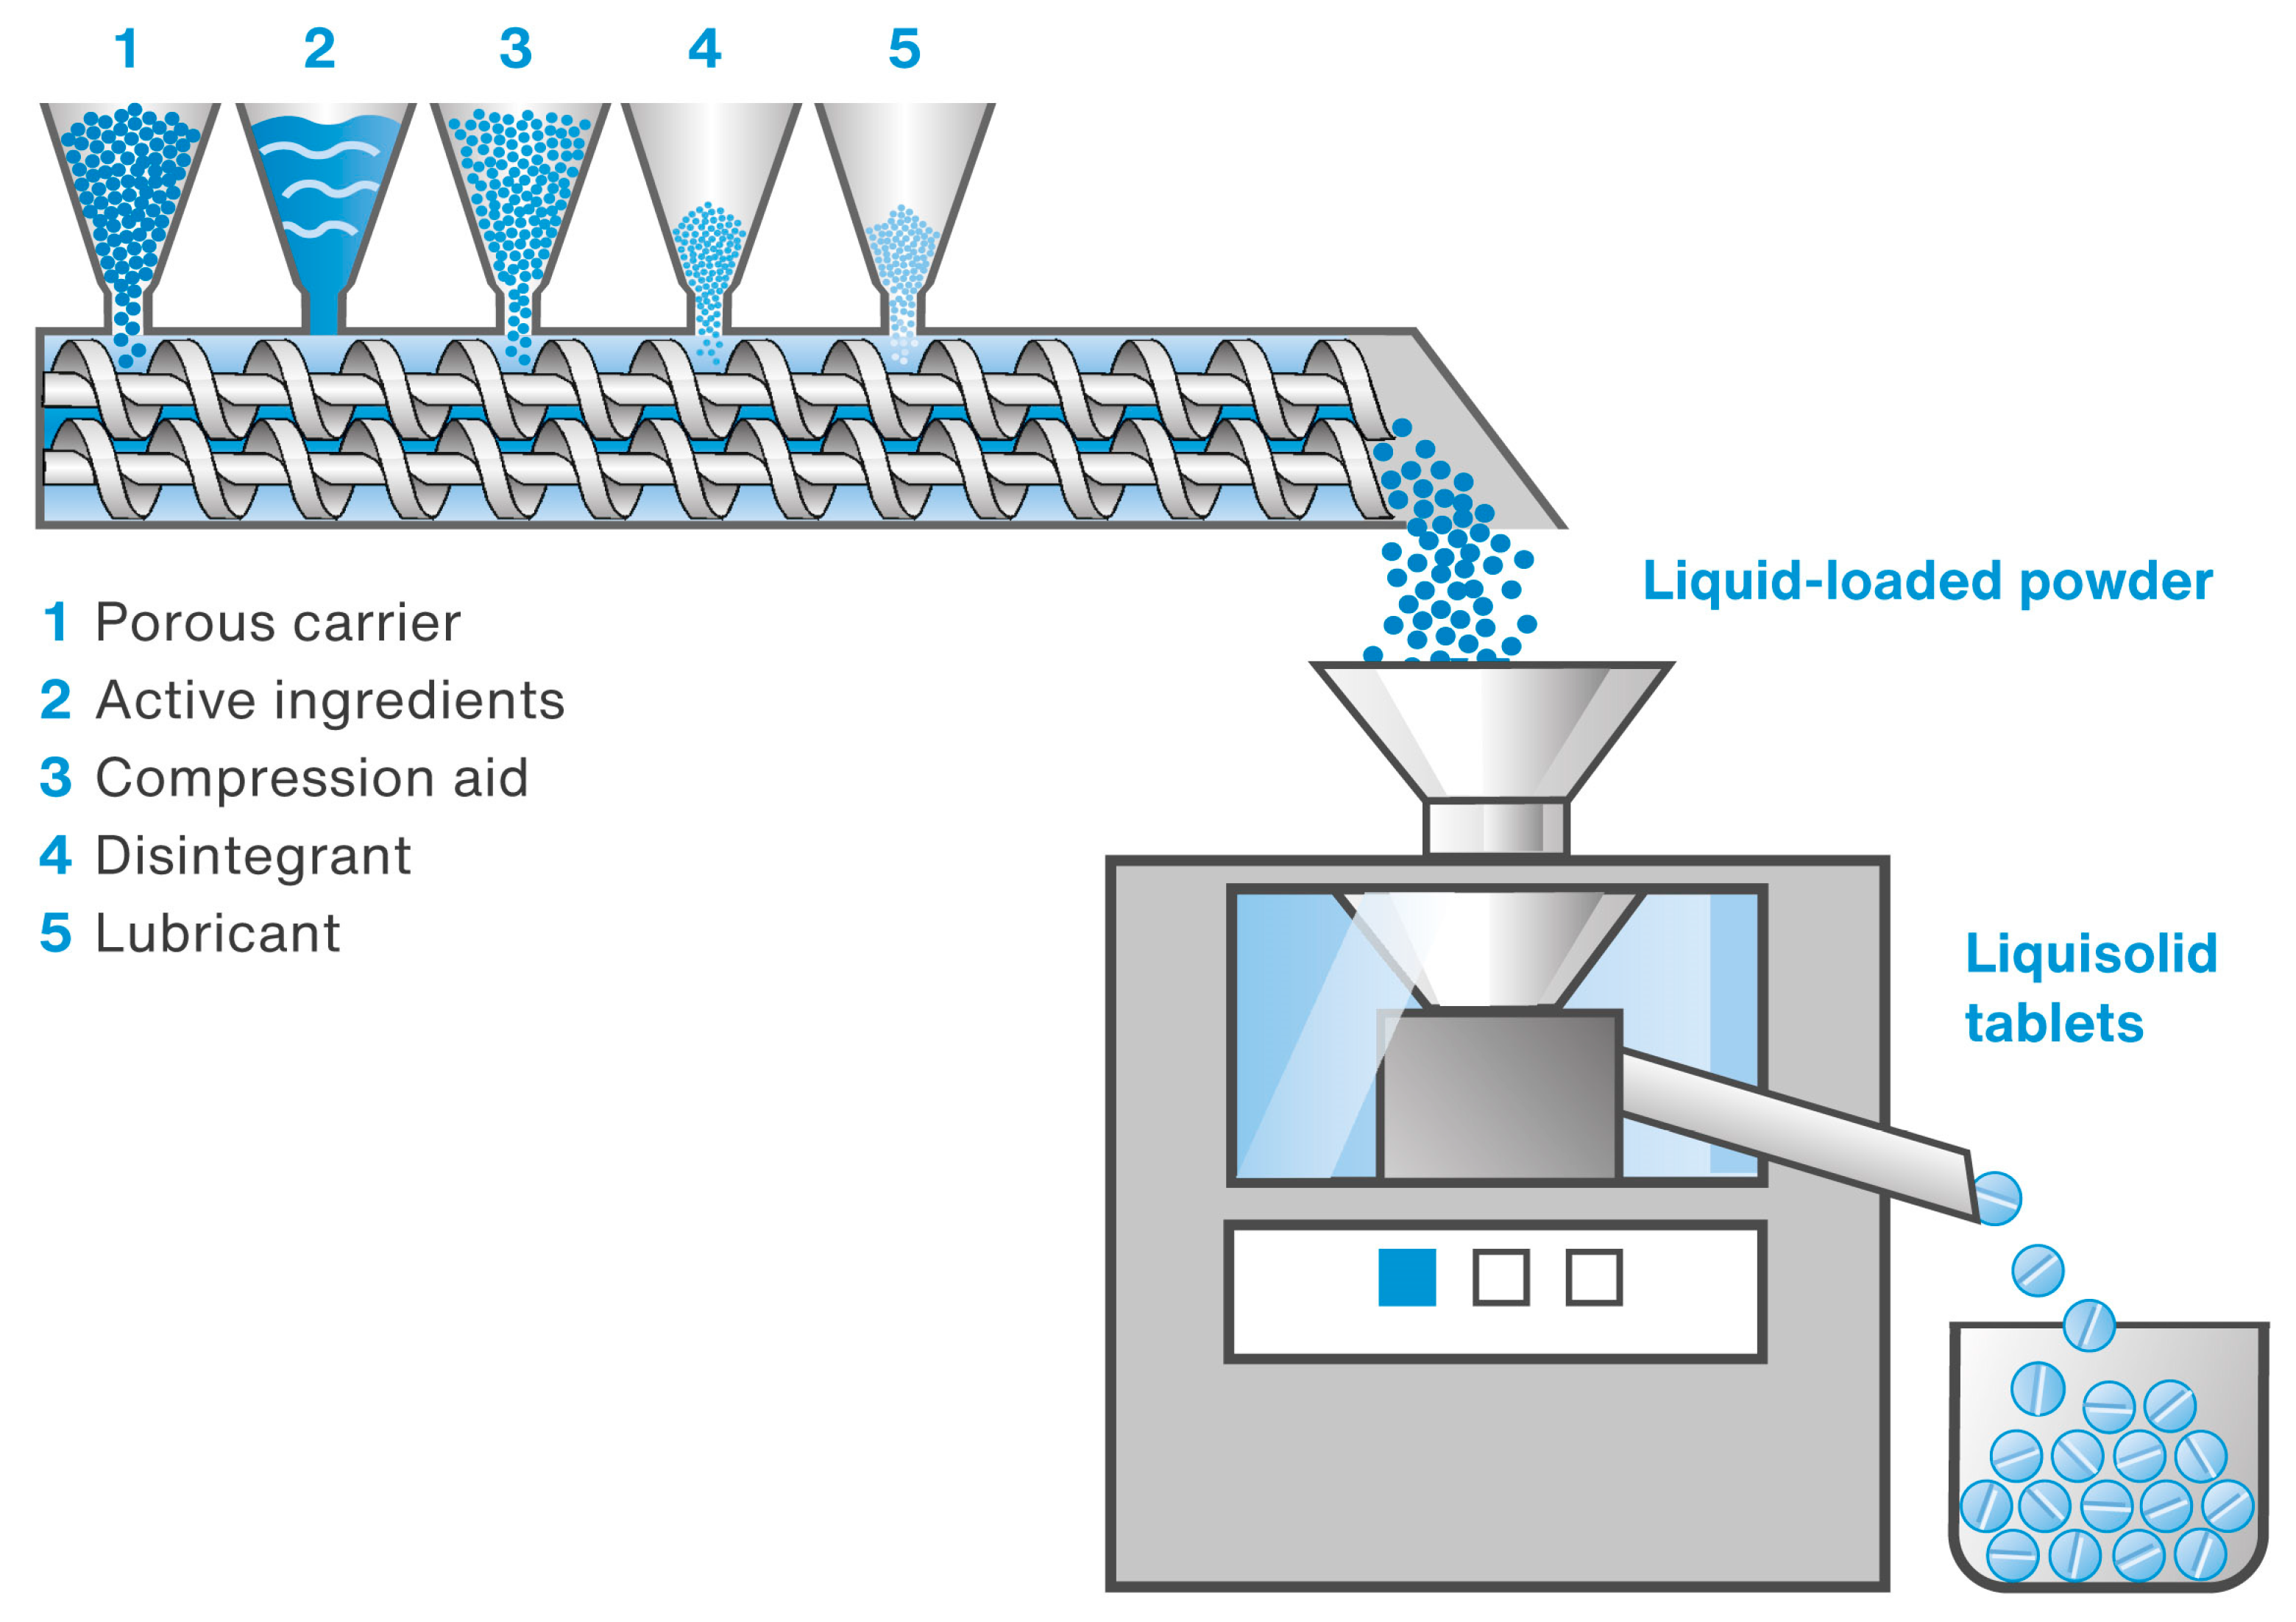 Towards the Continuous Manufacturing of Liquisolid Tablets Containing Simethicone and Loperamide Hydrochloride with the Use of a Twin-Screw Granulator